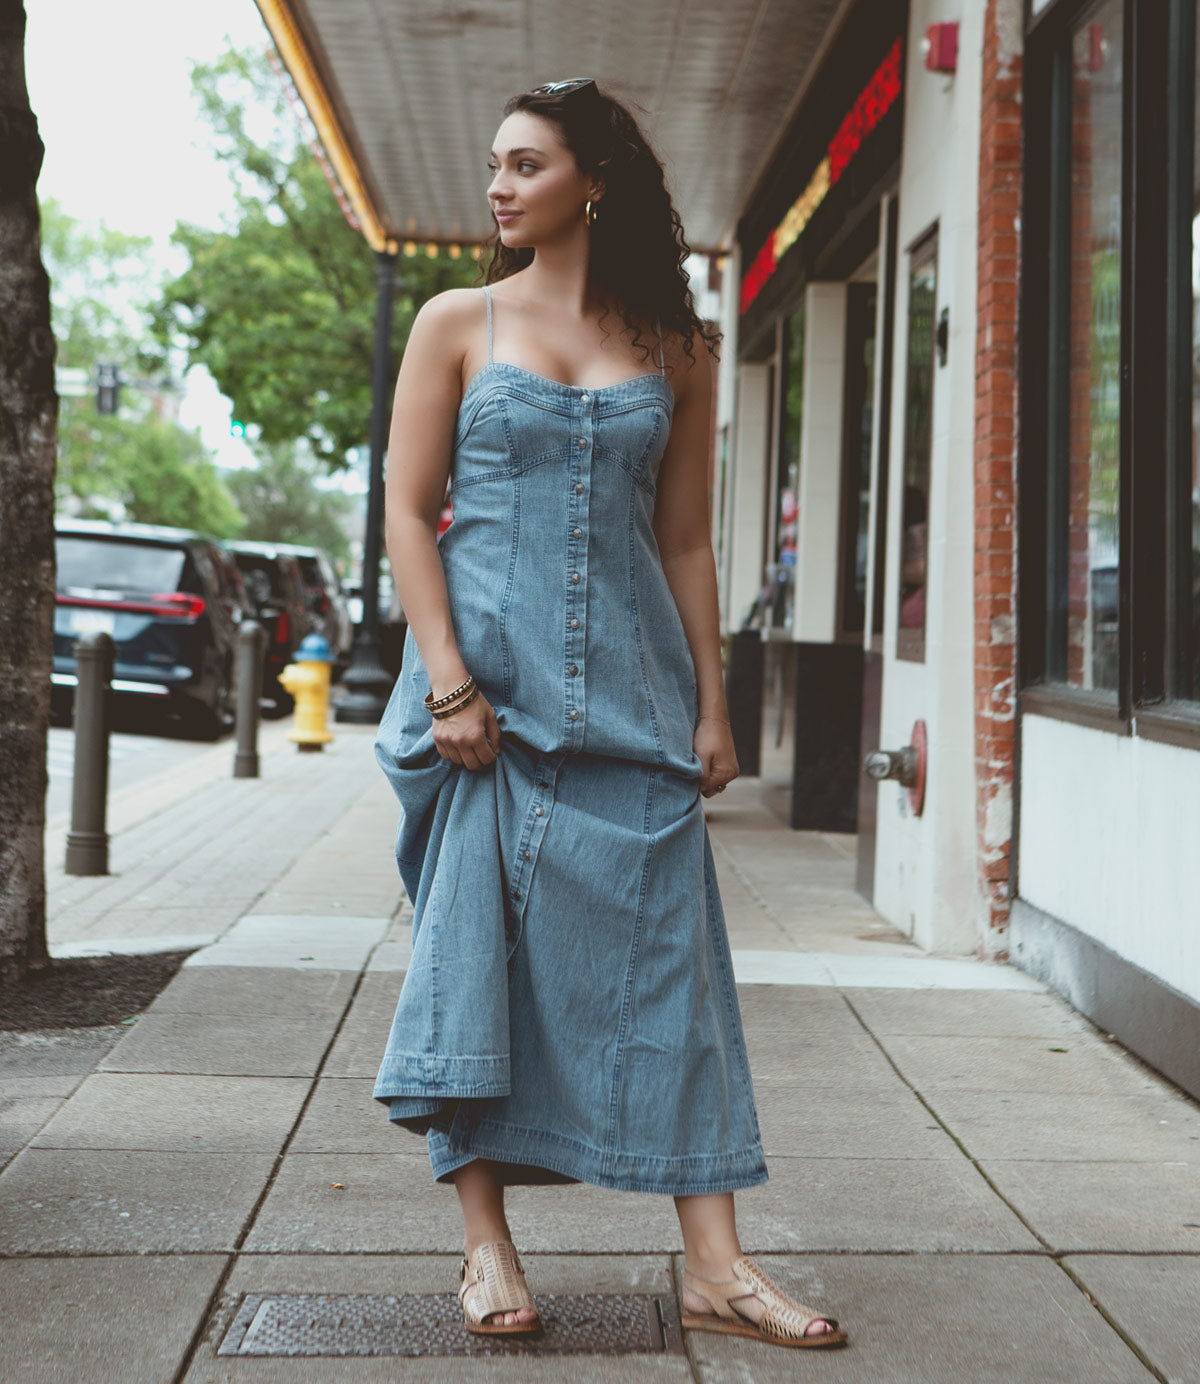 
                  
                    A woman in a strapless denim dress stands on a city sidewalk, looking to the side. She is wearing Roan Ballad II sandals with adjustable ankle closures, and the street behind her features storefronts and parked cars.
                  
                